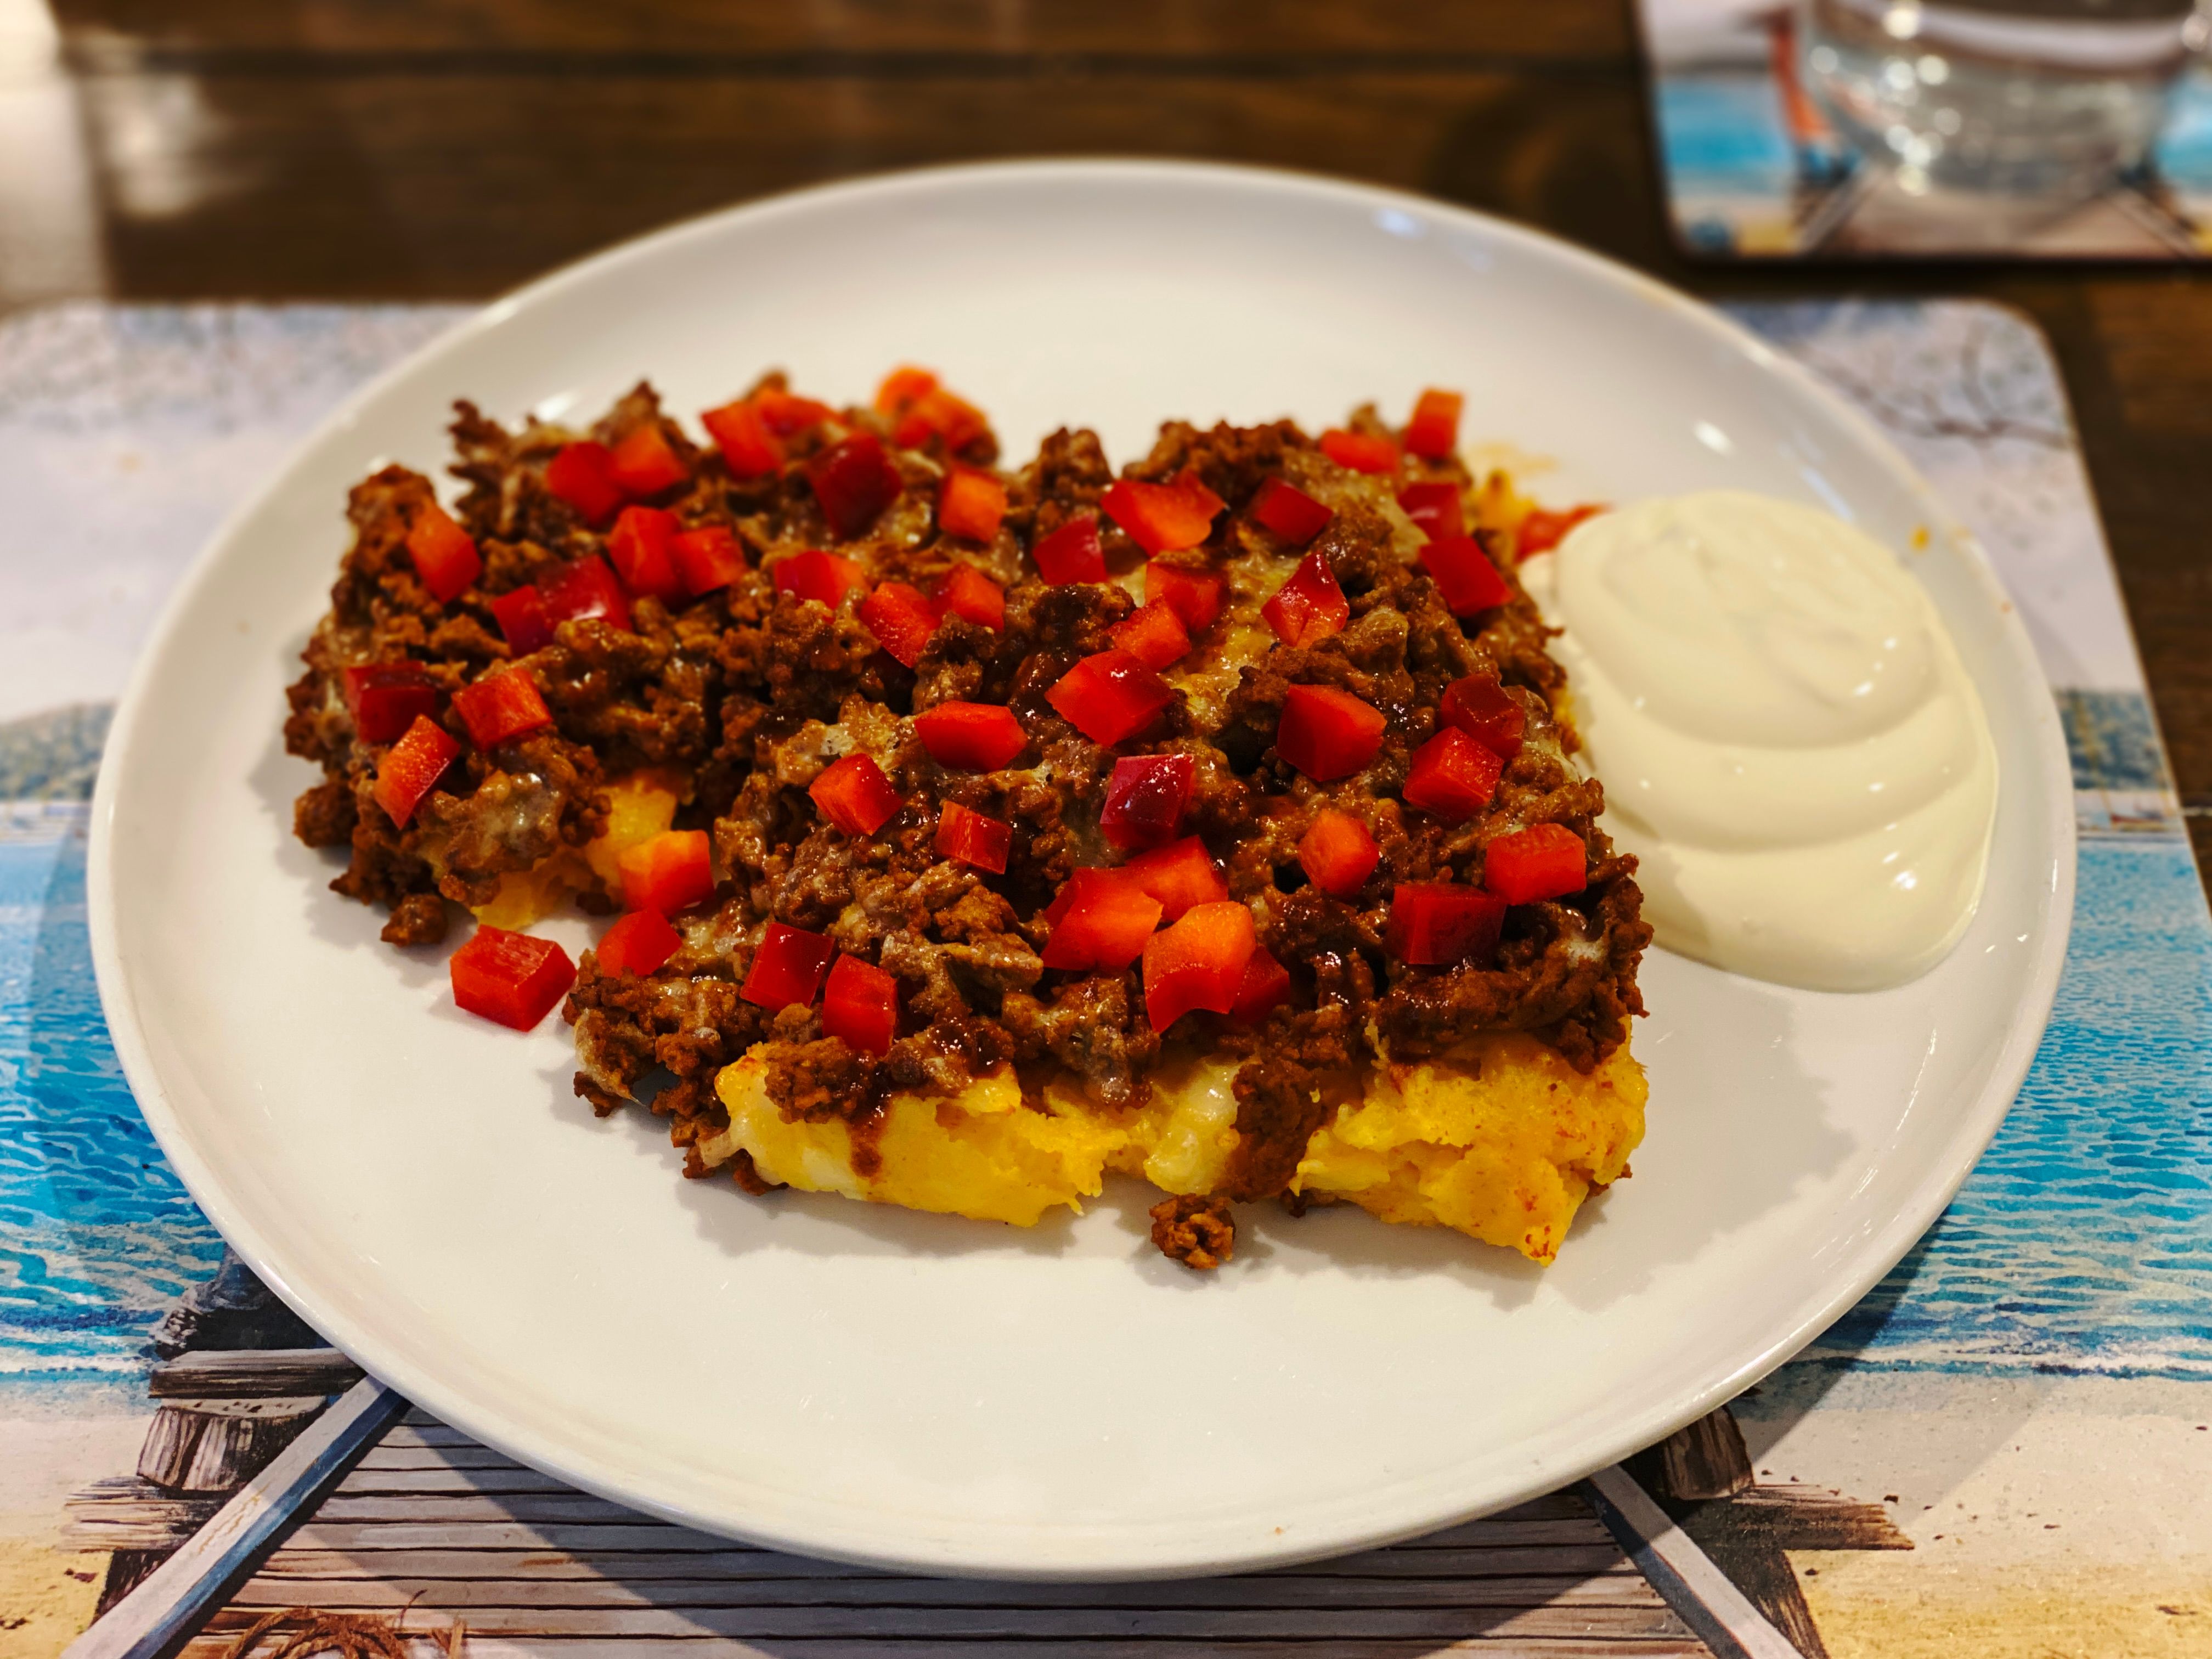 A photo of a dinner plate with a bed of golden mashed potato with a layer of beef mince on top, covered in chopped-up red capsicum and with a healthy dose of chipotle Tabasco sauce on top, and a big dollop of sour cream next to the mash.